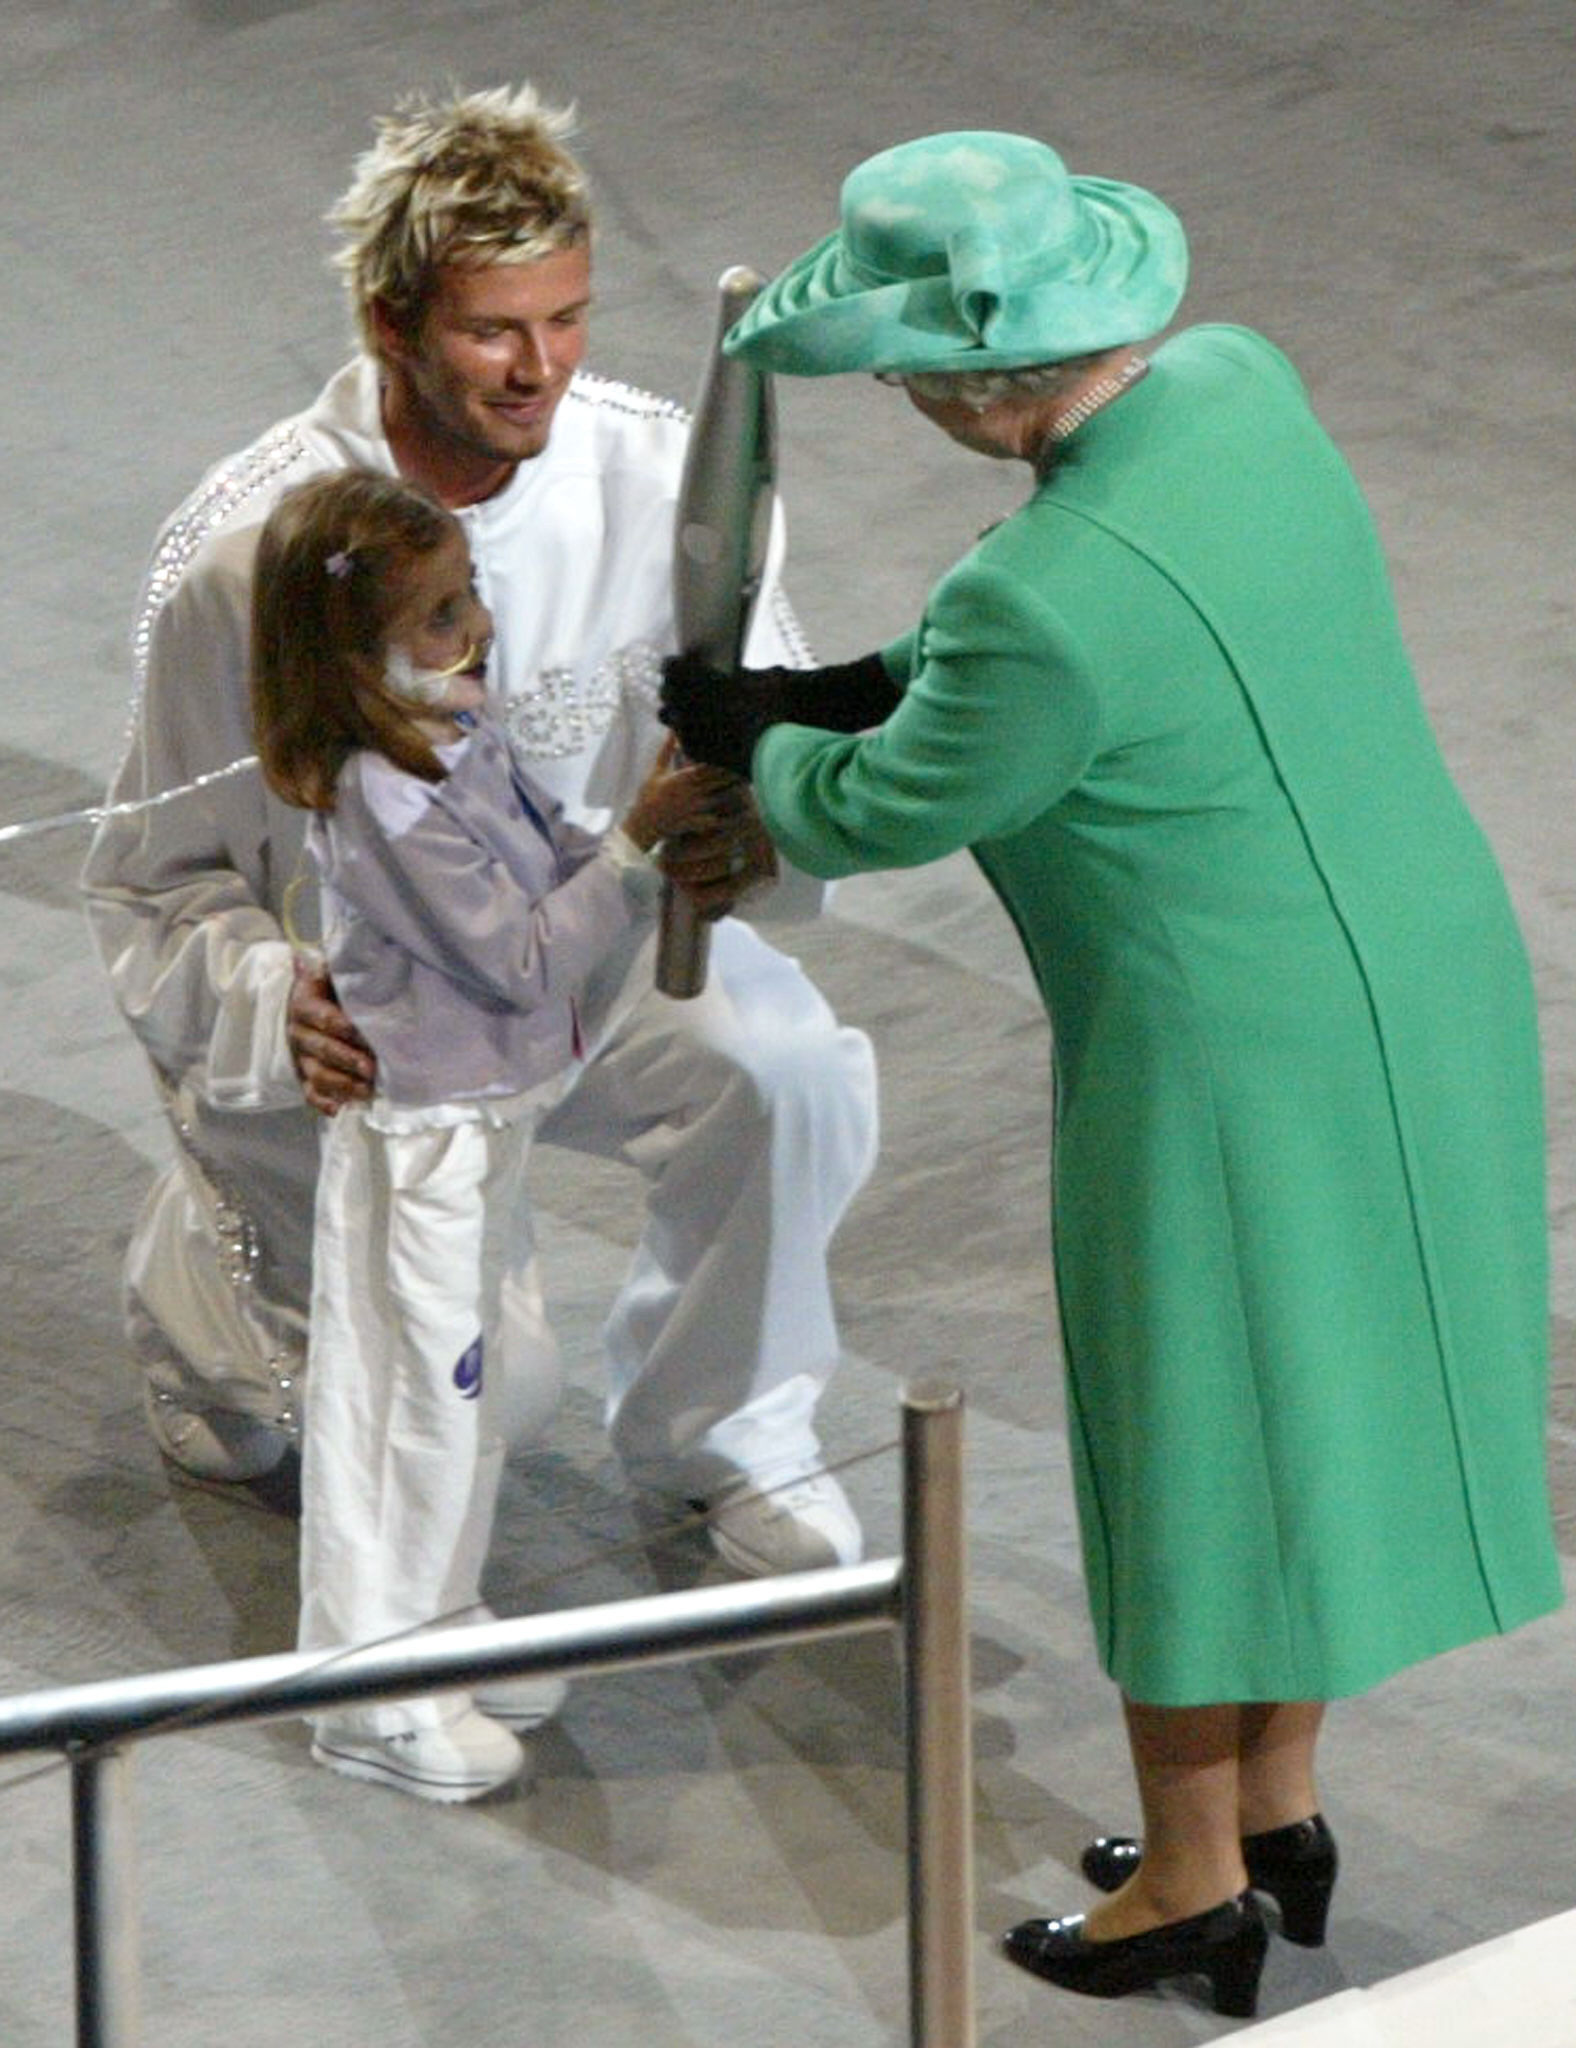 Kirsty Howard was joined by Manchester United and England footballer David Beckham to hand over the Jubilee Baton to the Queen at the Opening Ceremony of the 2002 Commonwealth Games in Manchester ©Getty Images